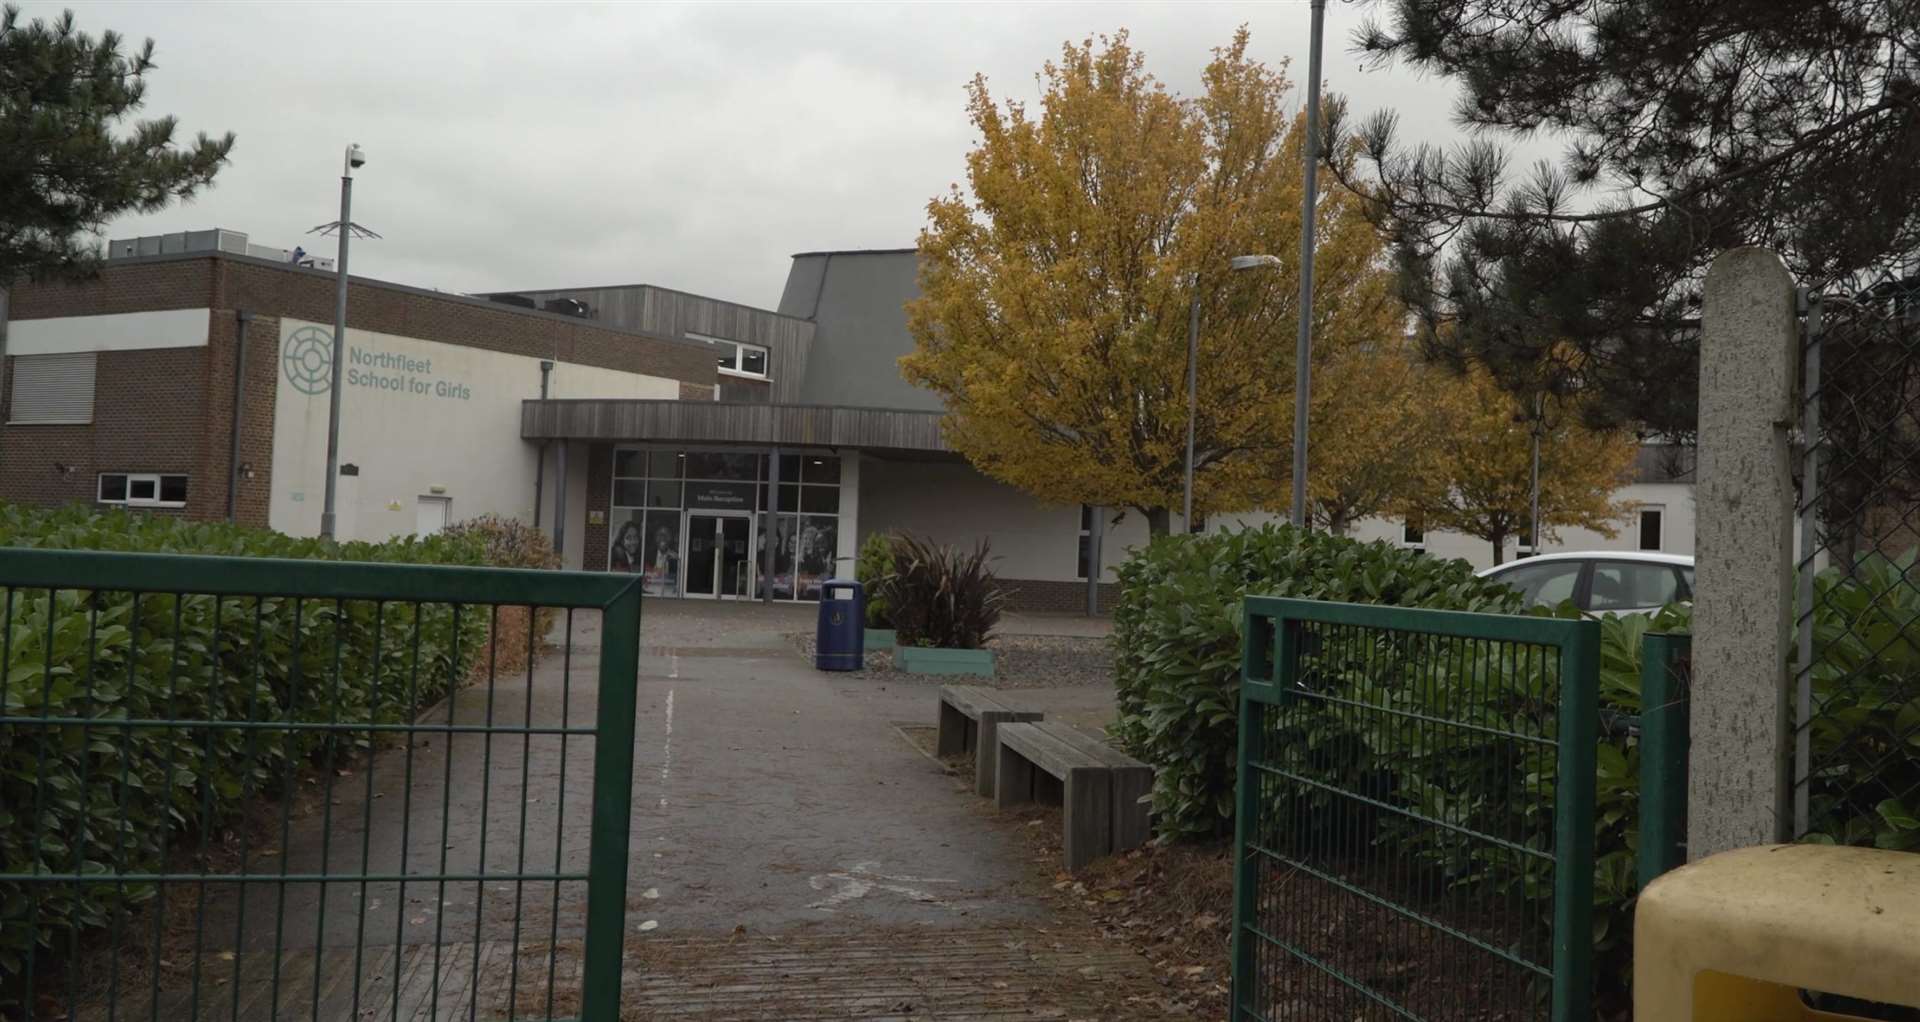 Students are being warned to take care as they leave Northfleet School for Girls in Hall Road, Gravesend. Picture: KMTV